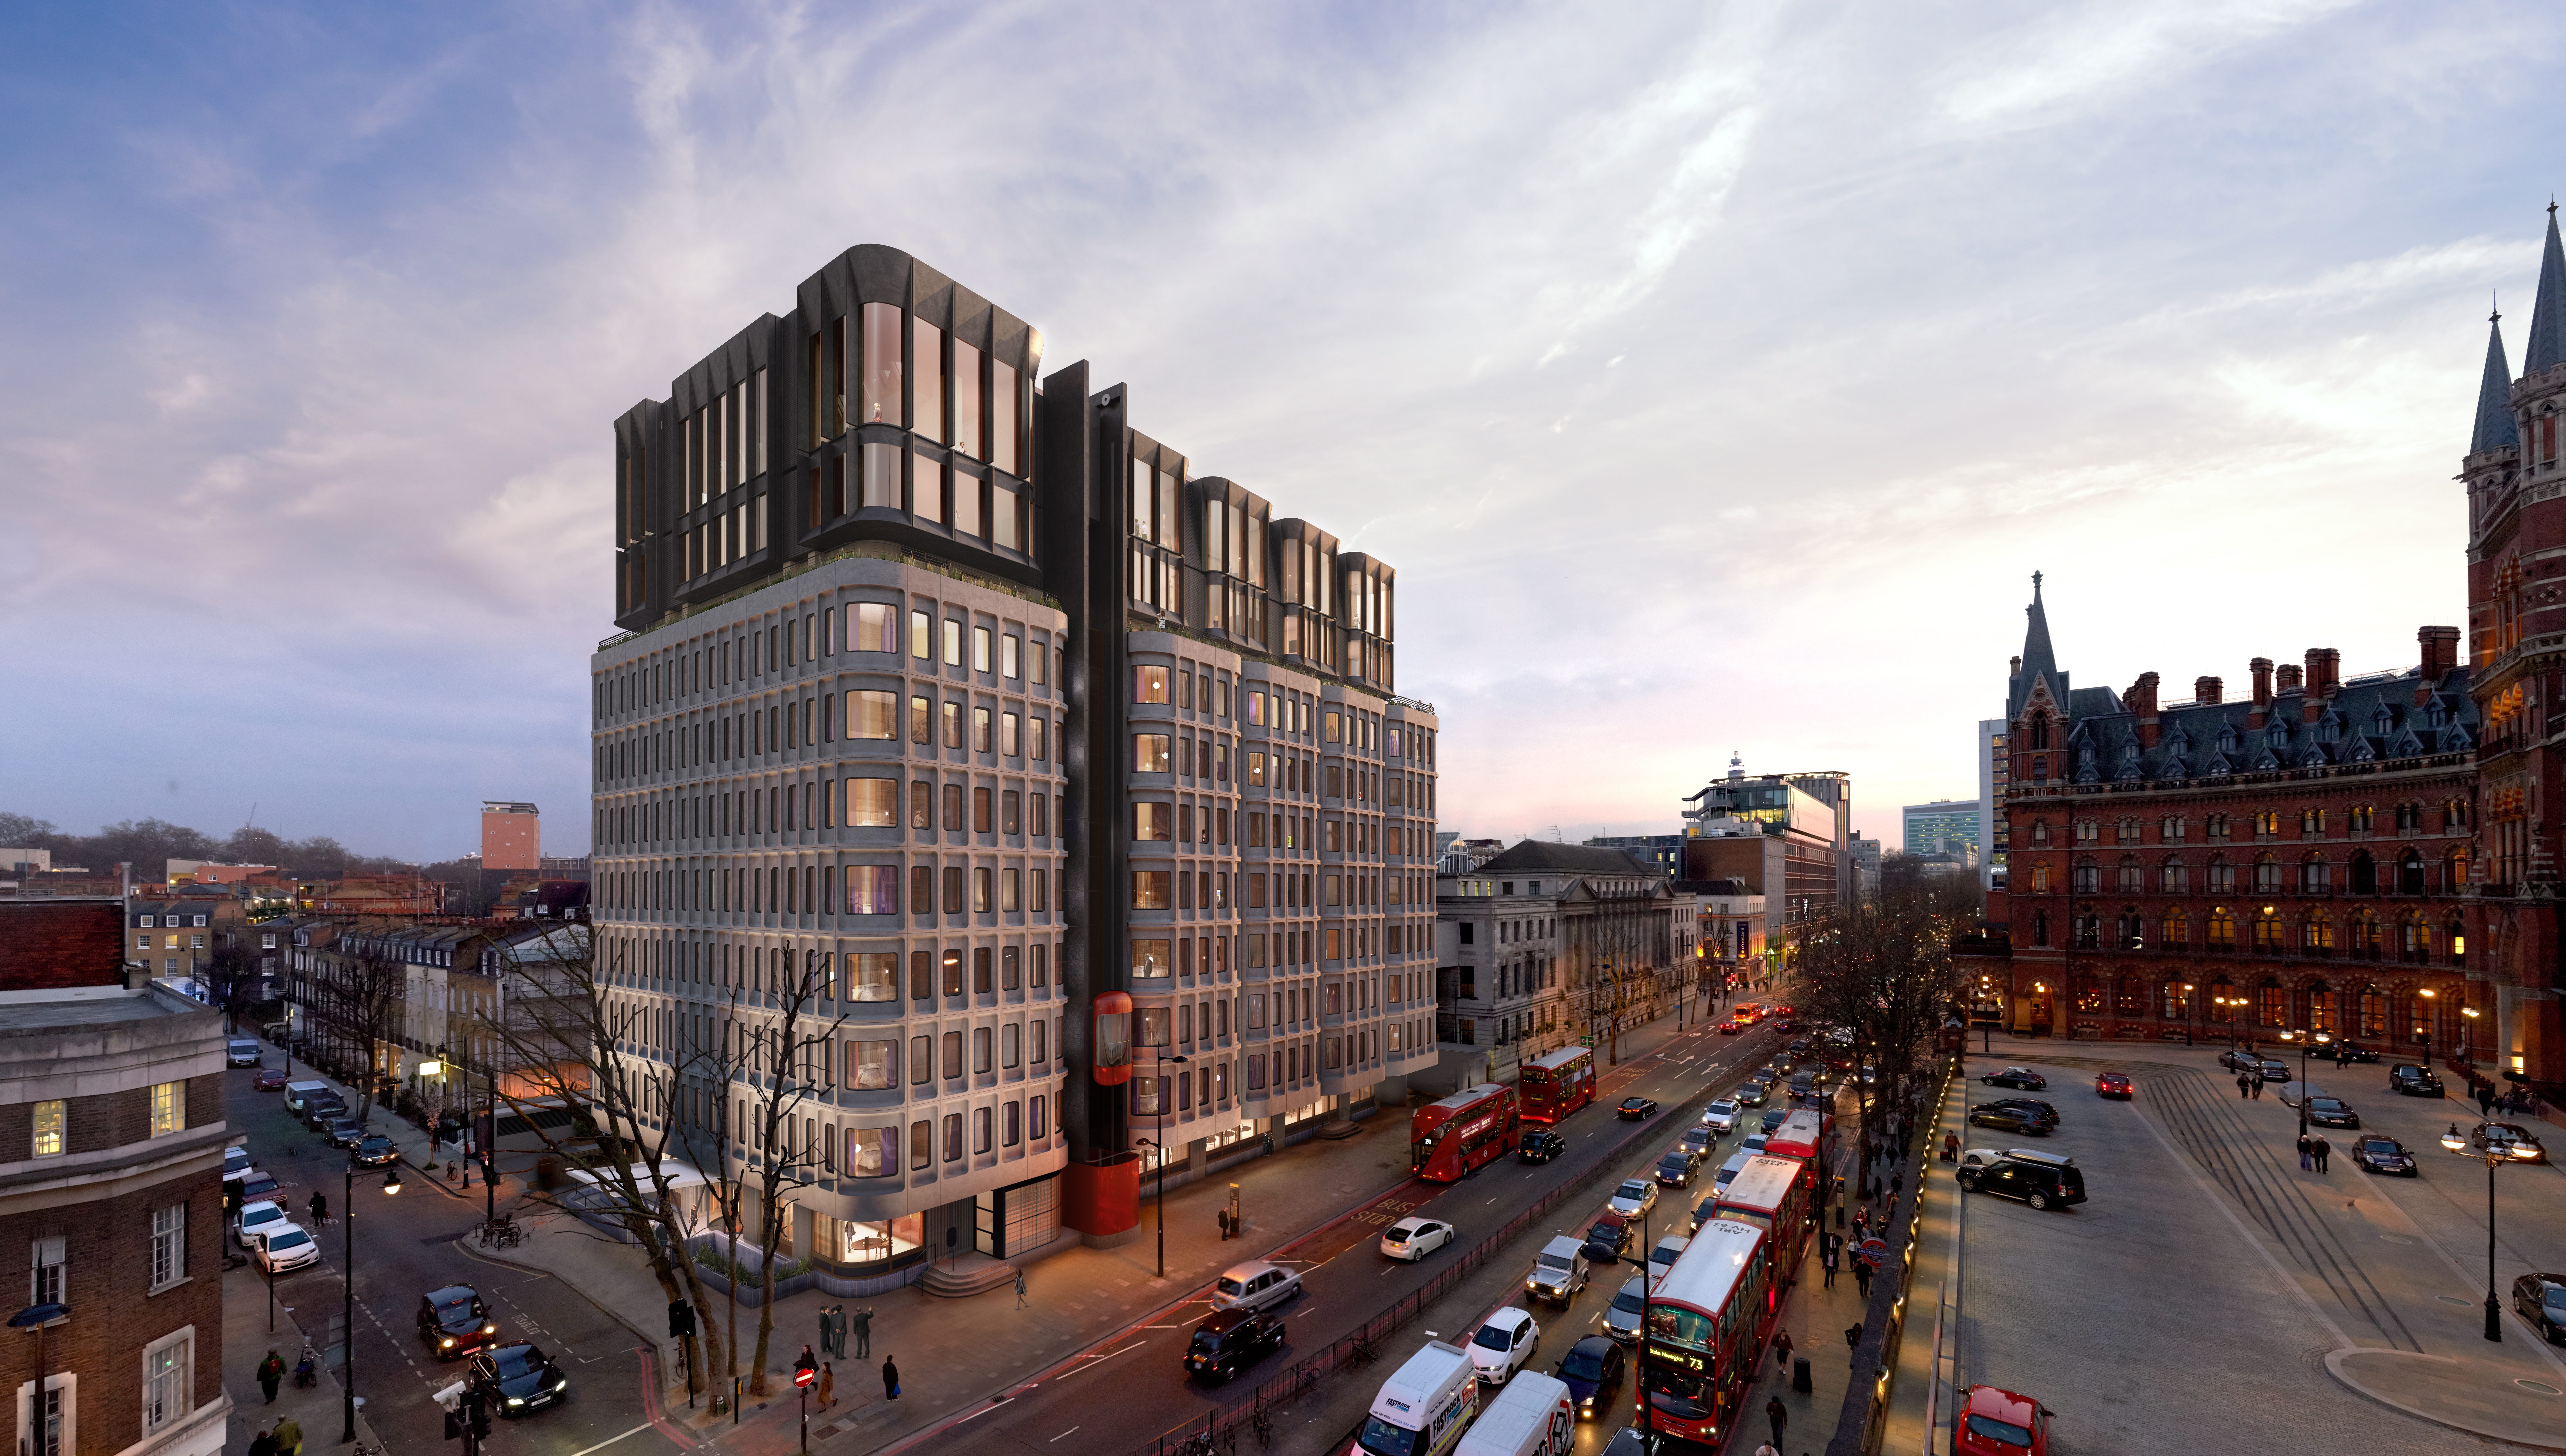 Standard International Hotel in King’s Cross, London will bring three new restaurants to the area